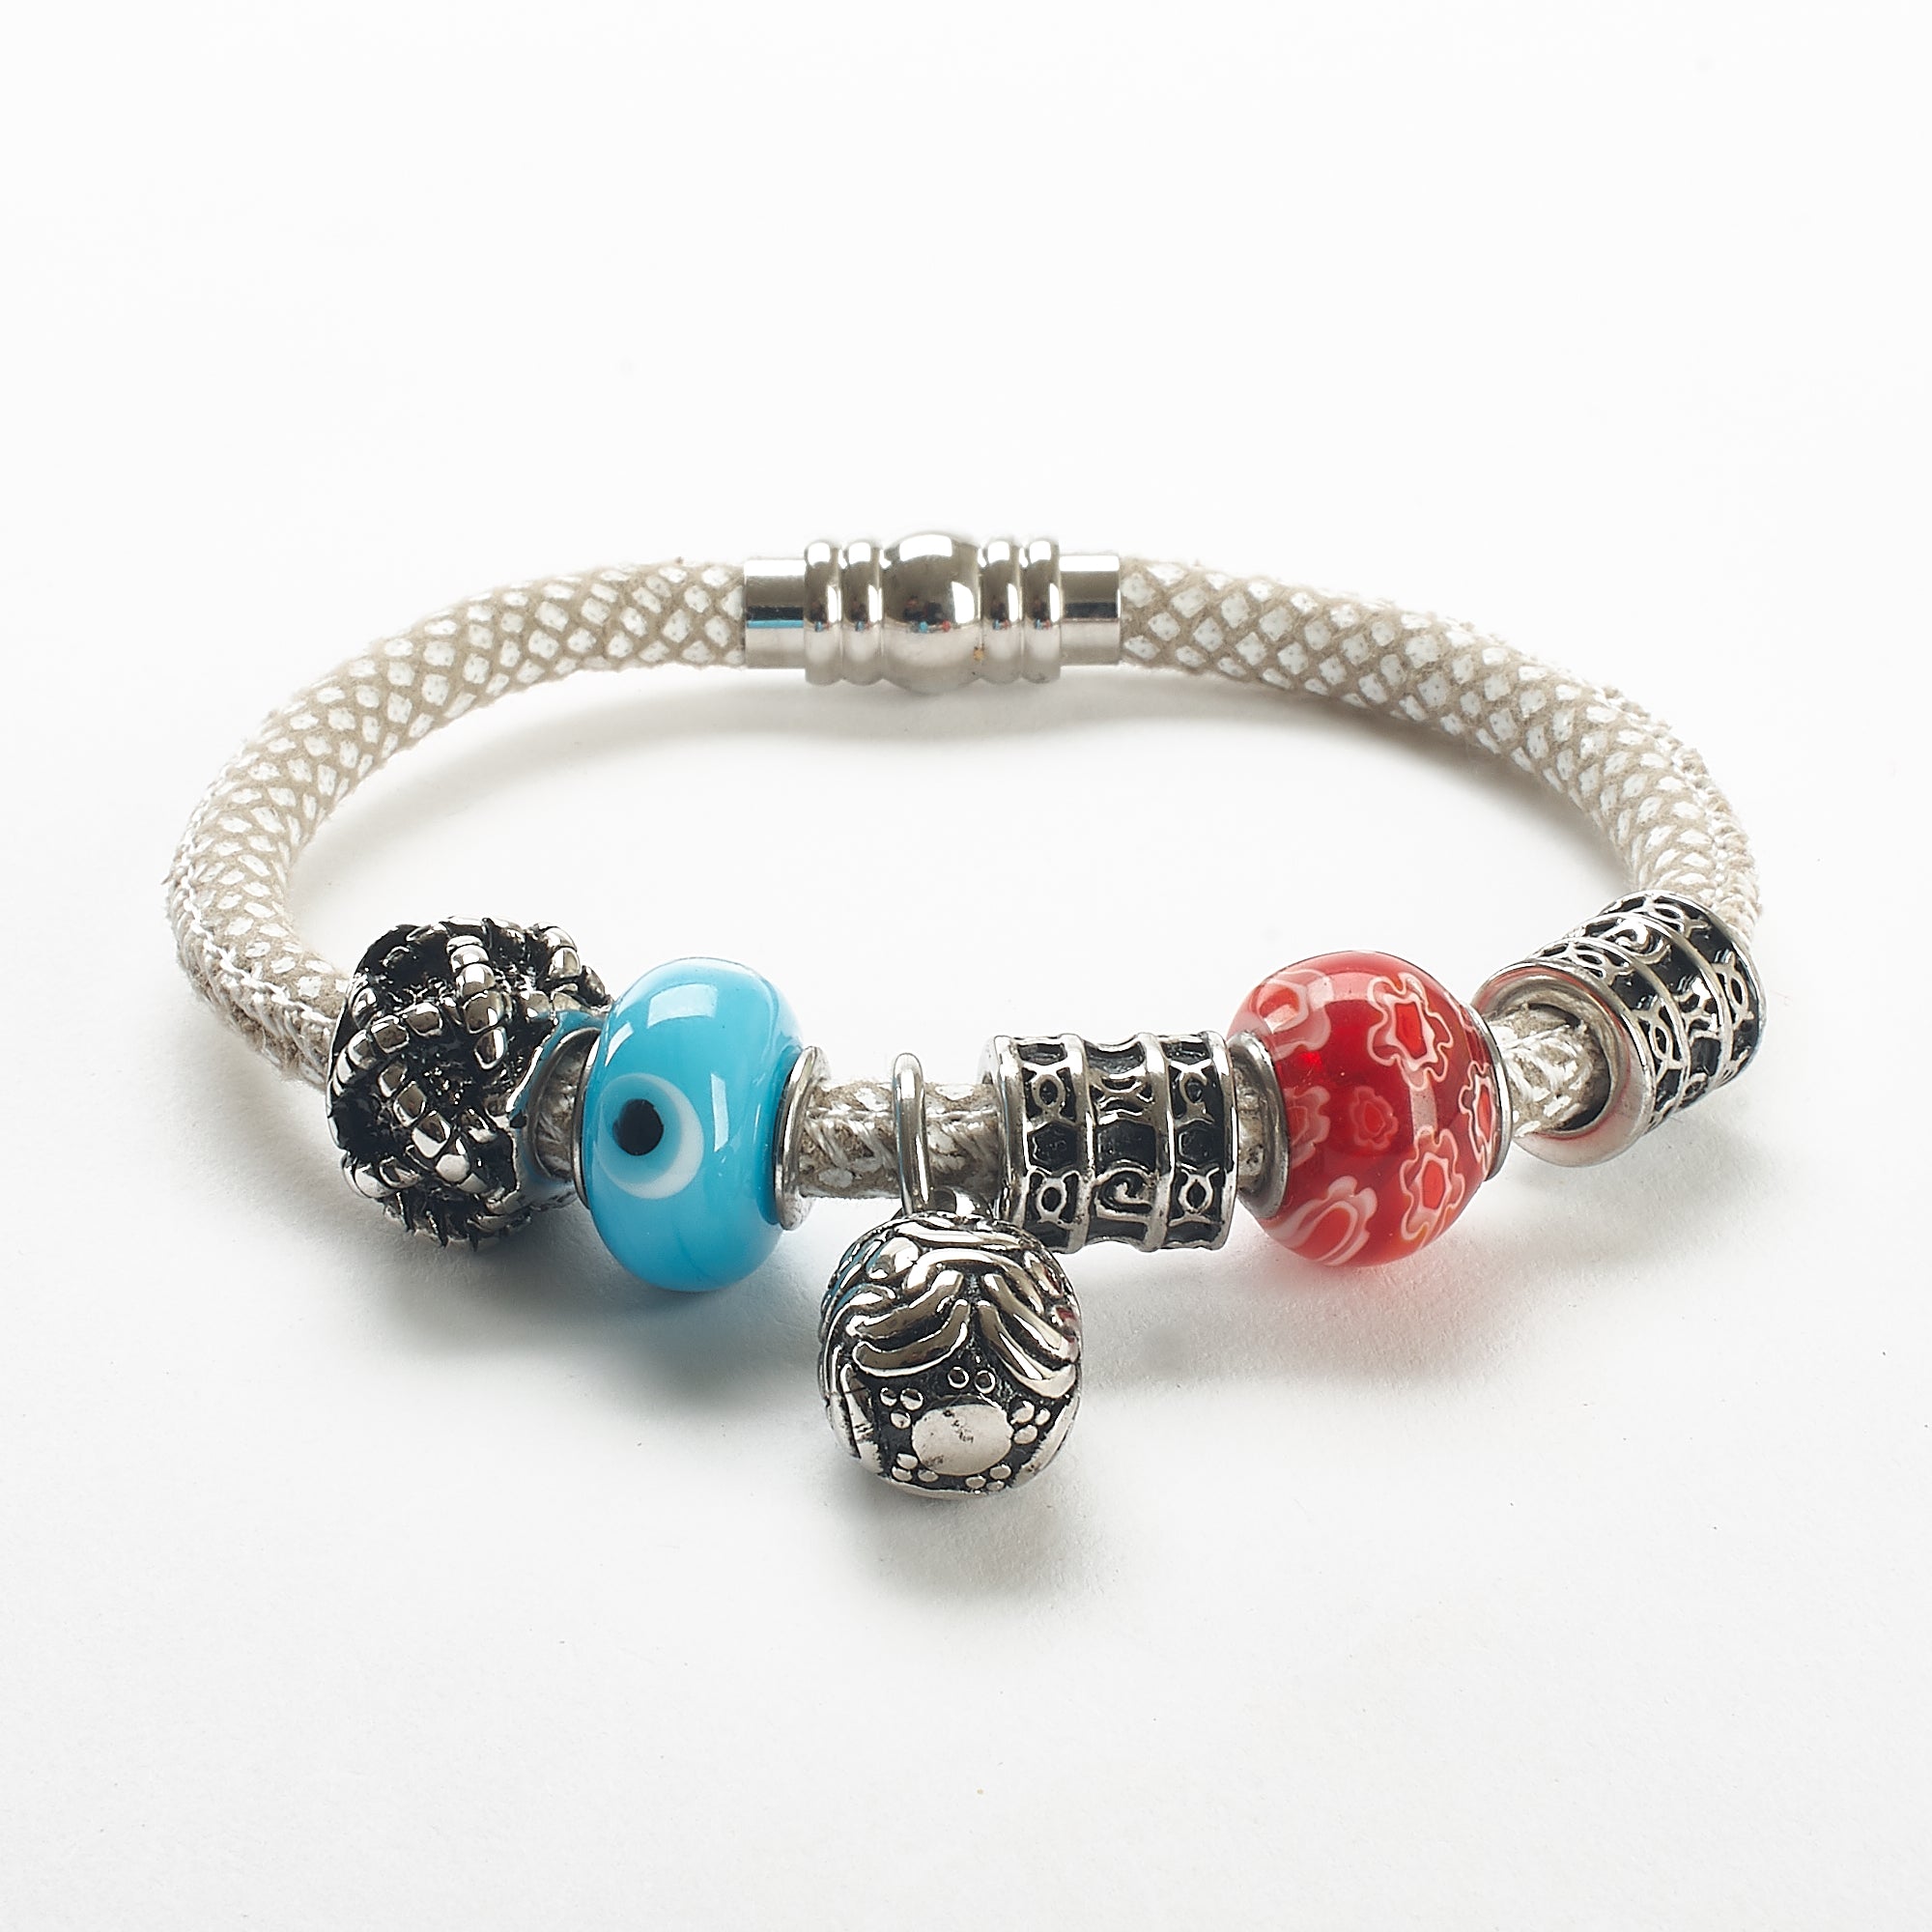 Cremation Bracelet - Silver, Blue and Coral on White